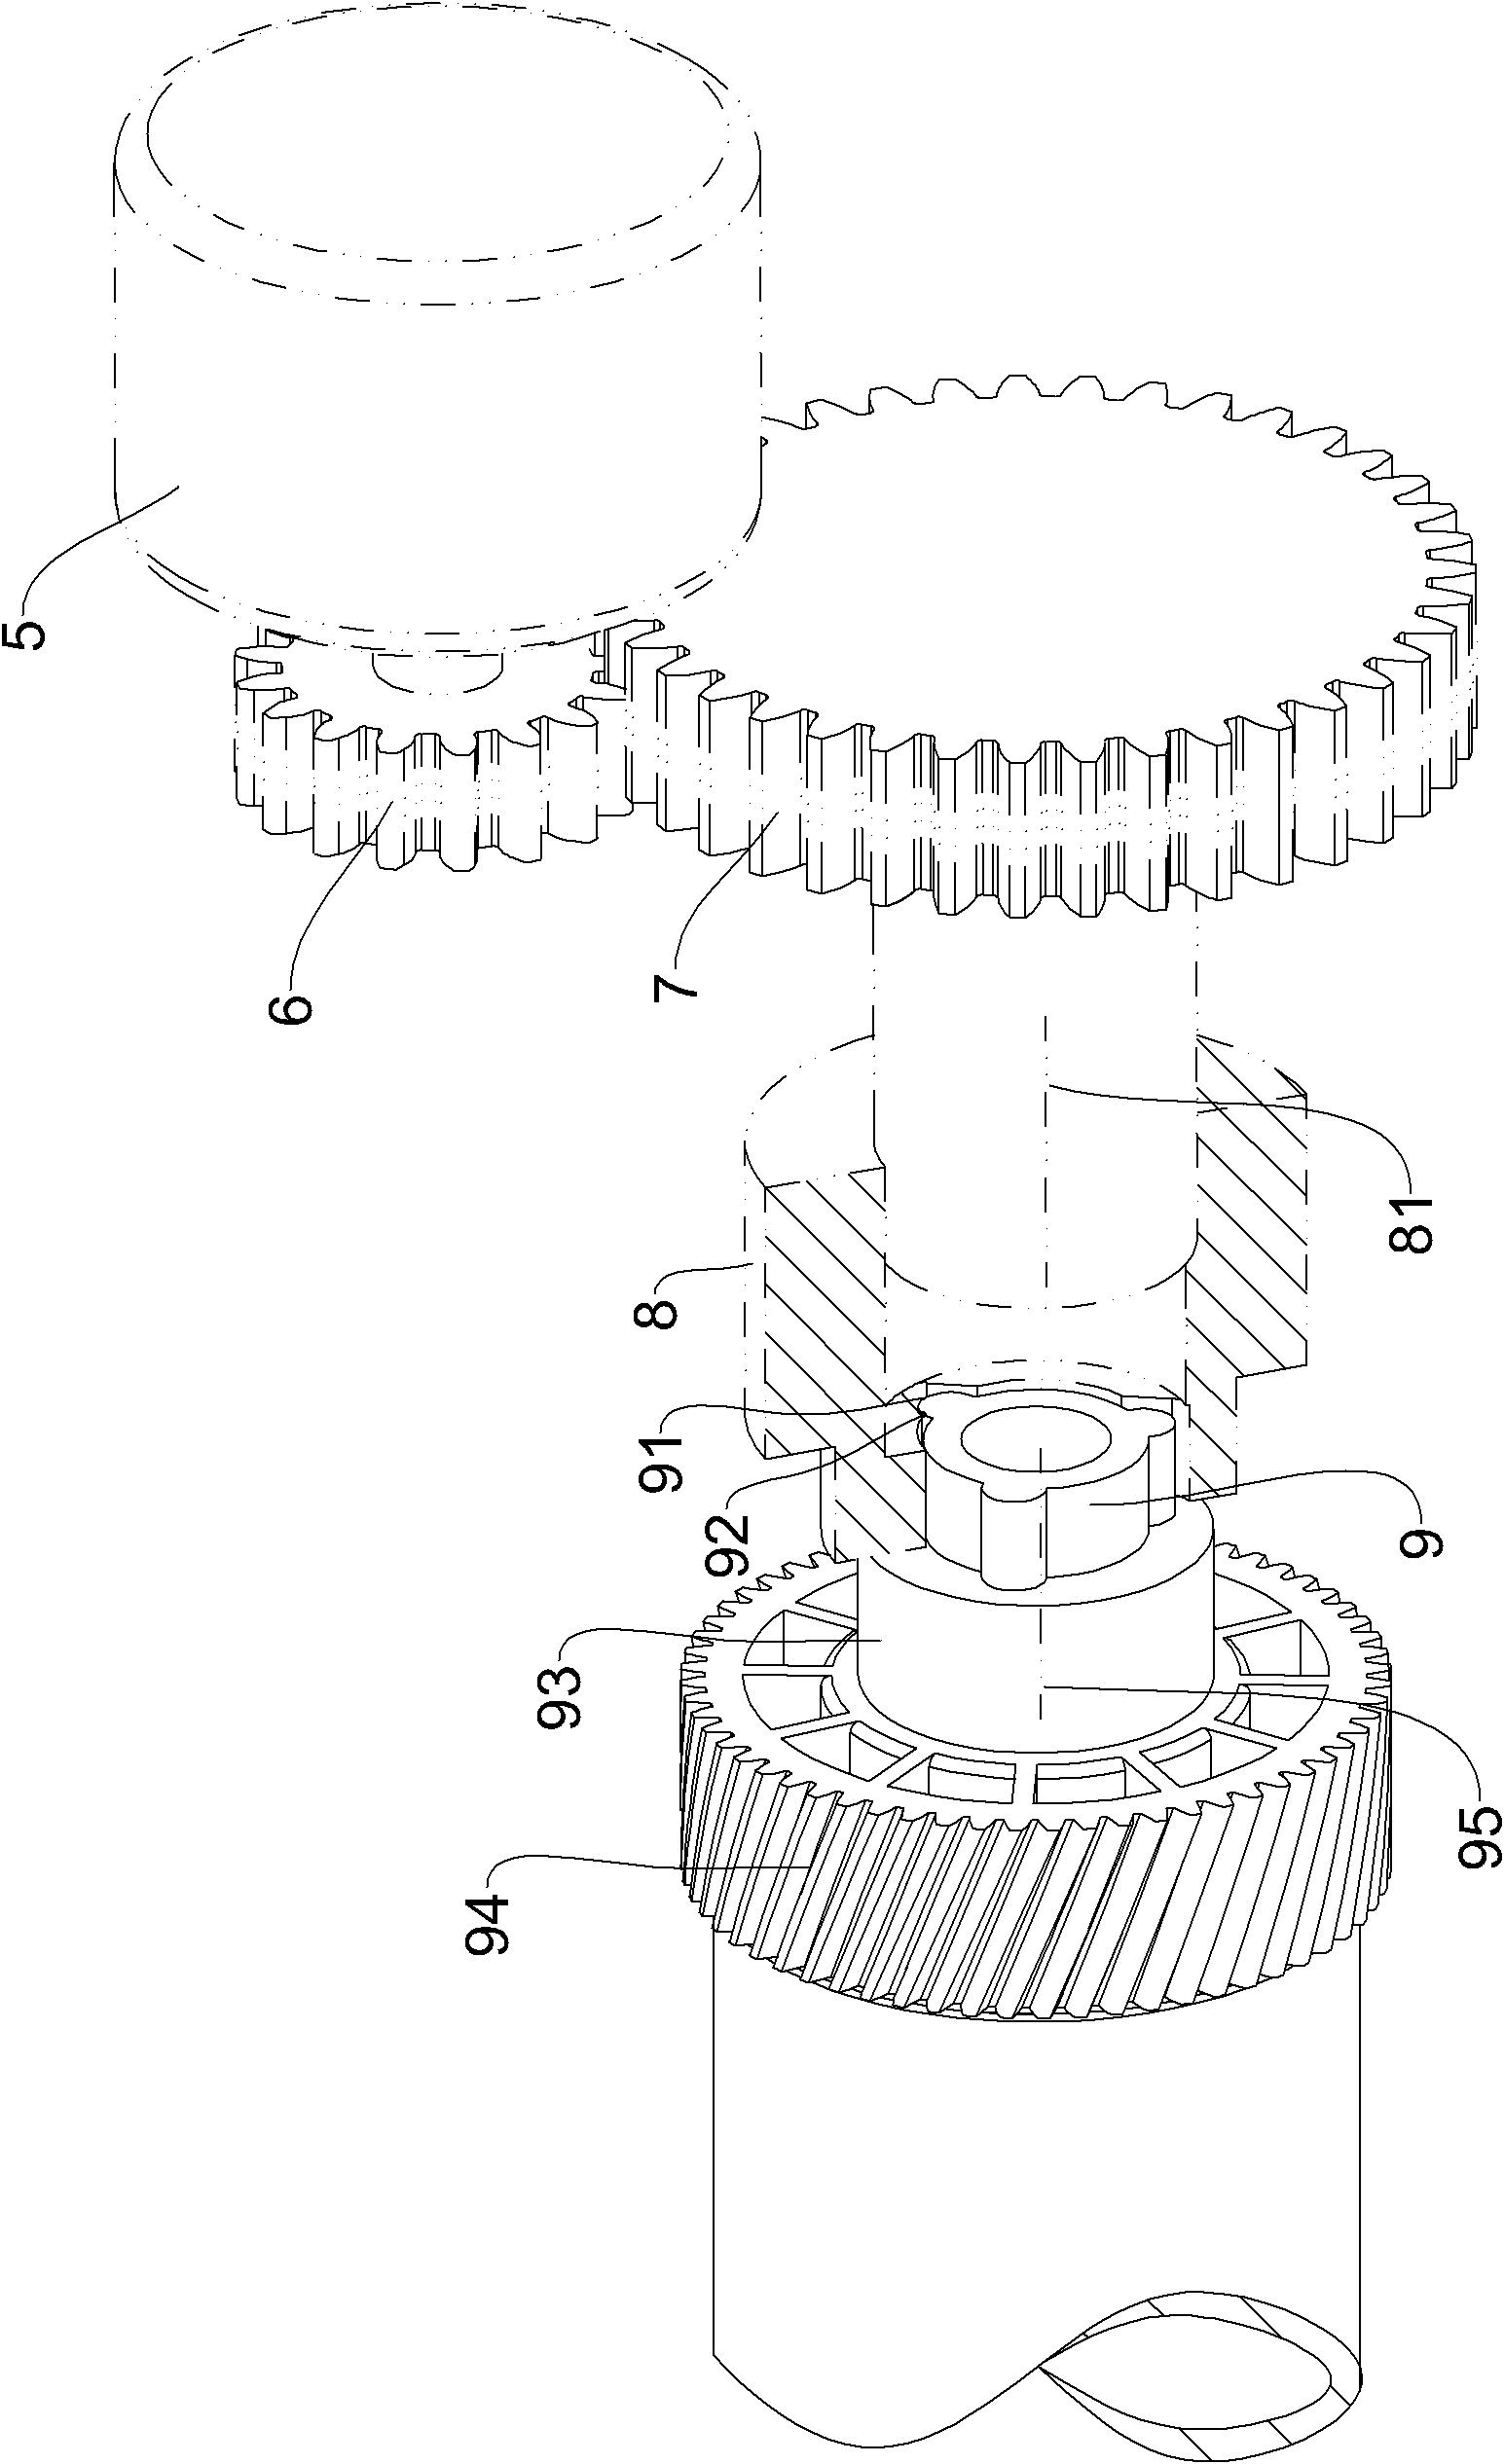 Photosensitive drum drive assembly, photosensitive drum and processing cartridge